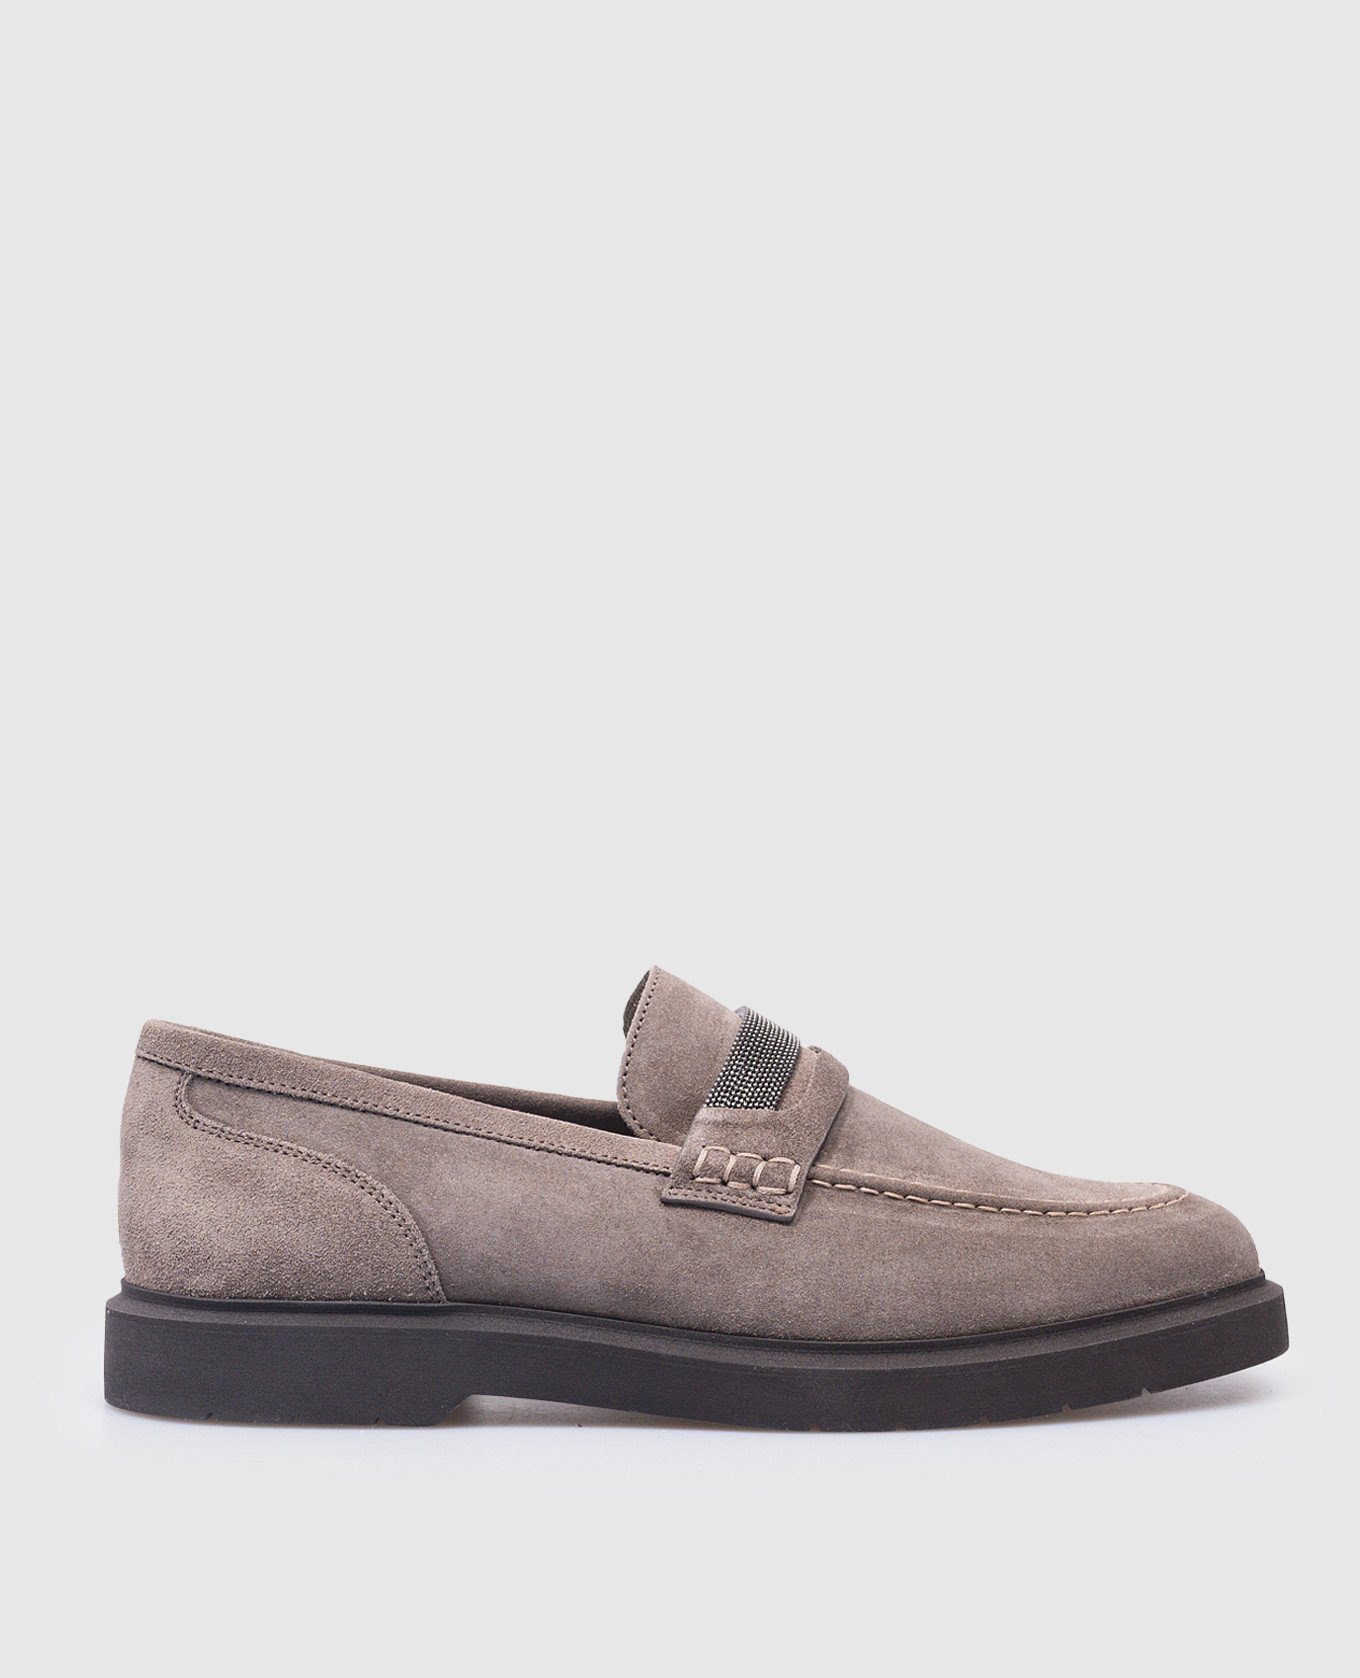 Gray suede loafers with monil chain